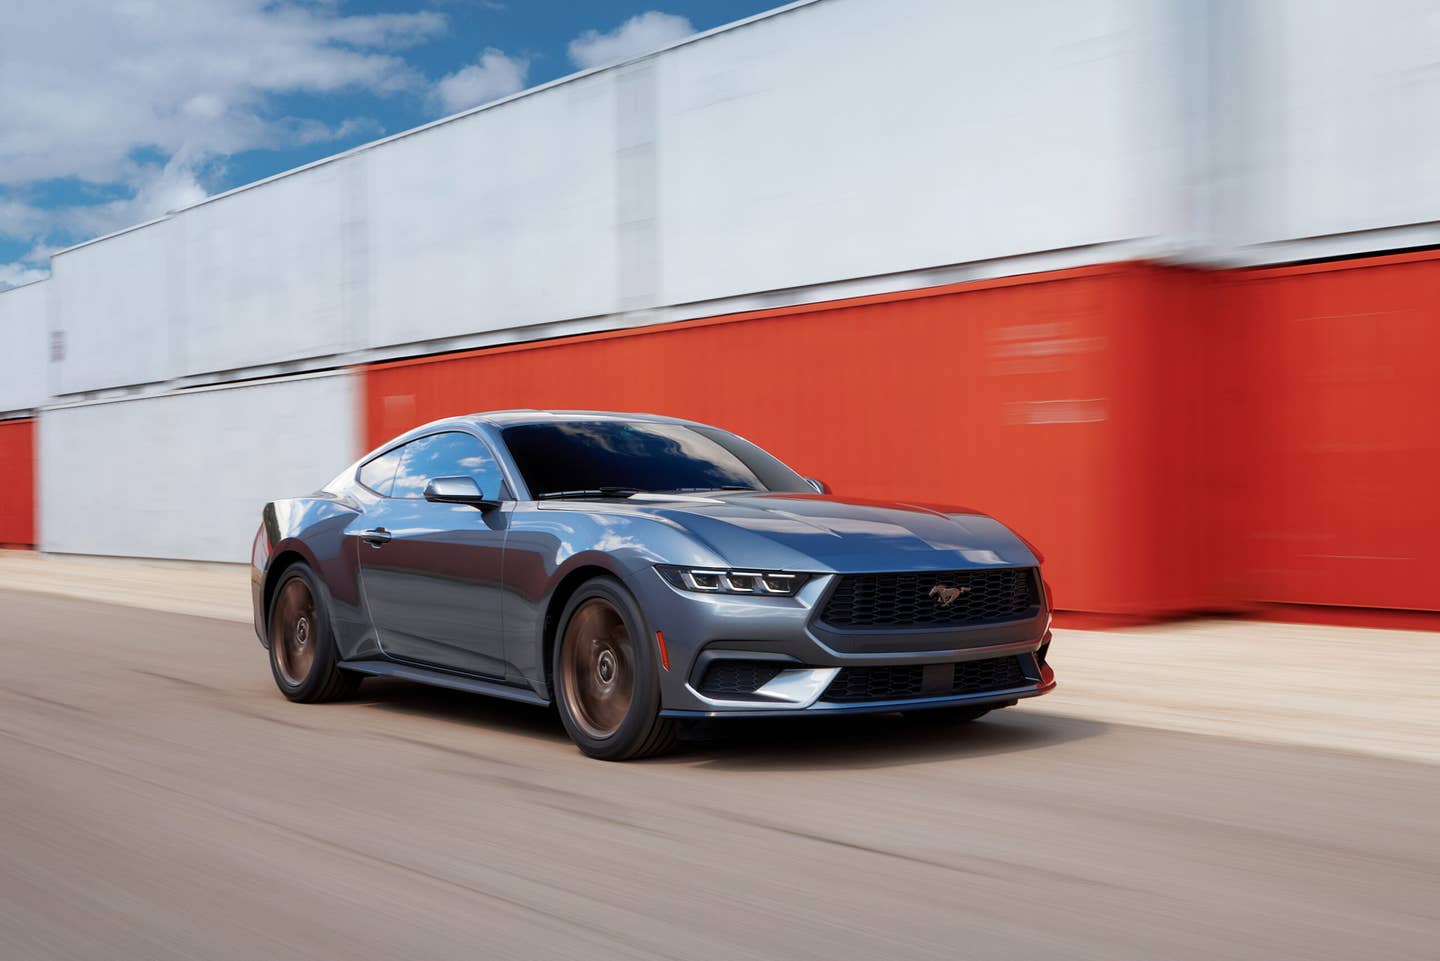 The seventh generation Mustang is the most exhilarating and visceral yet, from its fighter jet-inspired digital cockpit to new advanced turbocharged and naturally aspirated engines to its edgier yet timeless exterior design. Pre-production vehicles shown. Closed course. Professional driver.